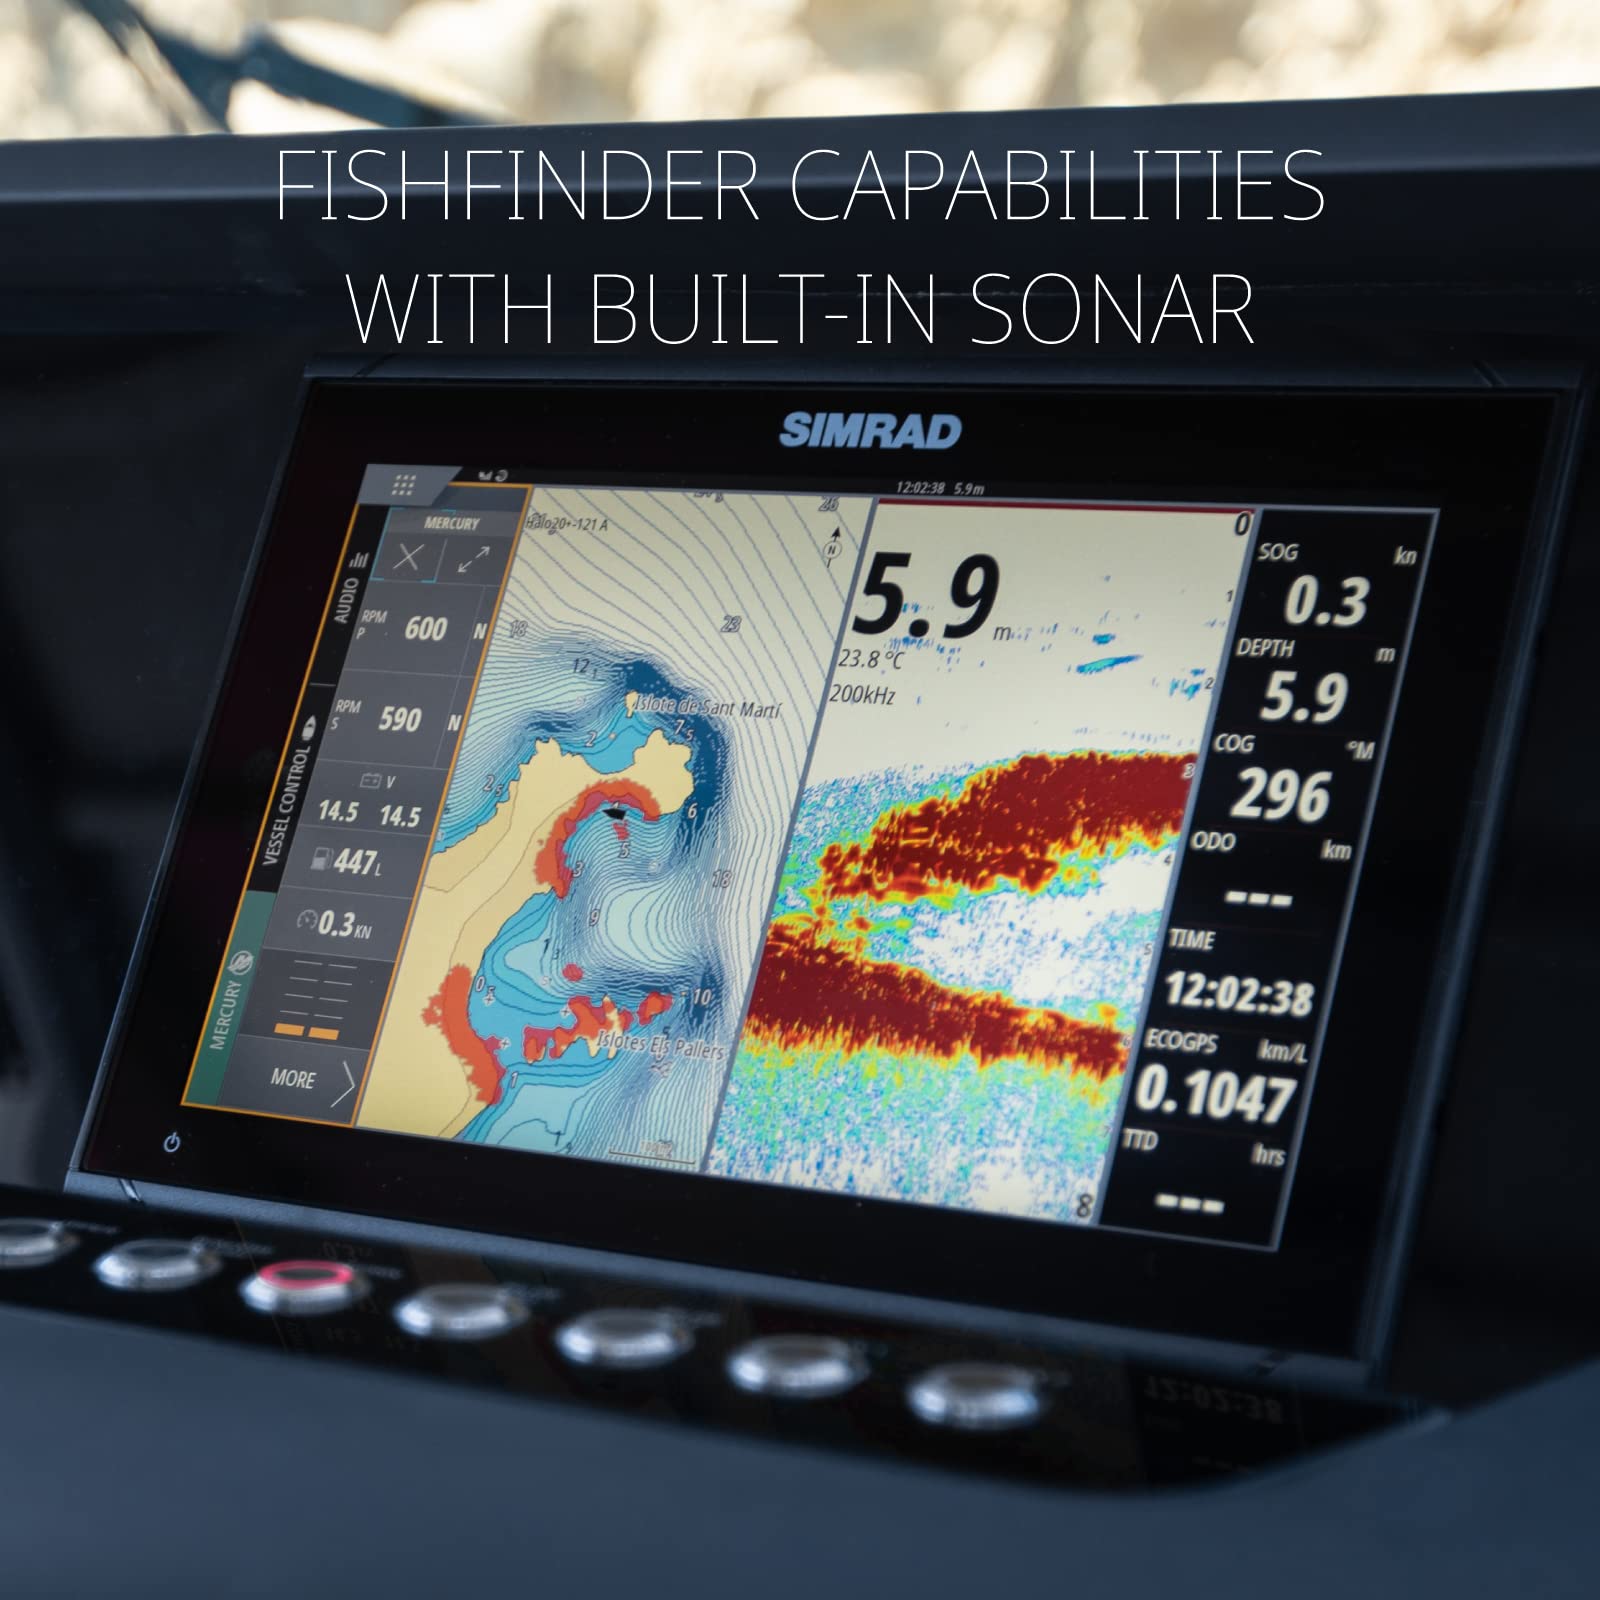 Simrad GO Chartplotter and Fish Finder, with Transducer and Radar Options, Preloaded C-MAP Discover Chart Card